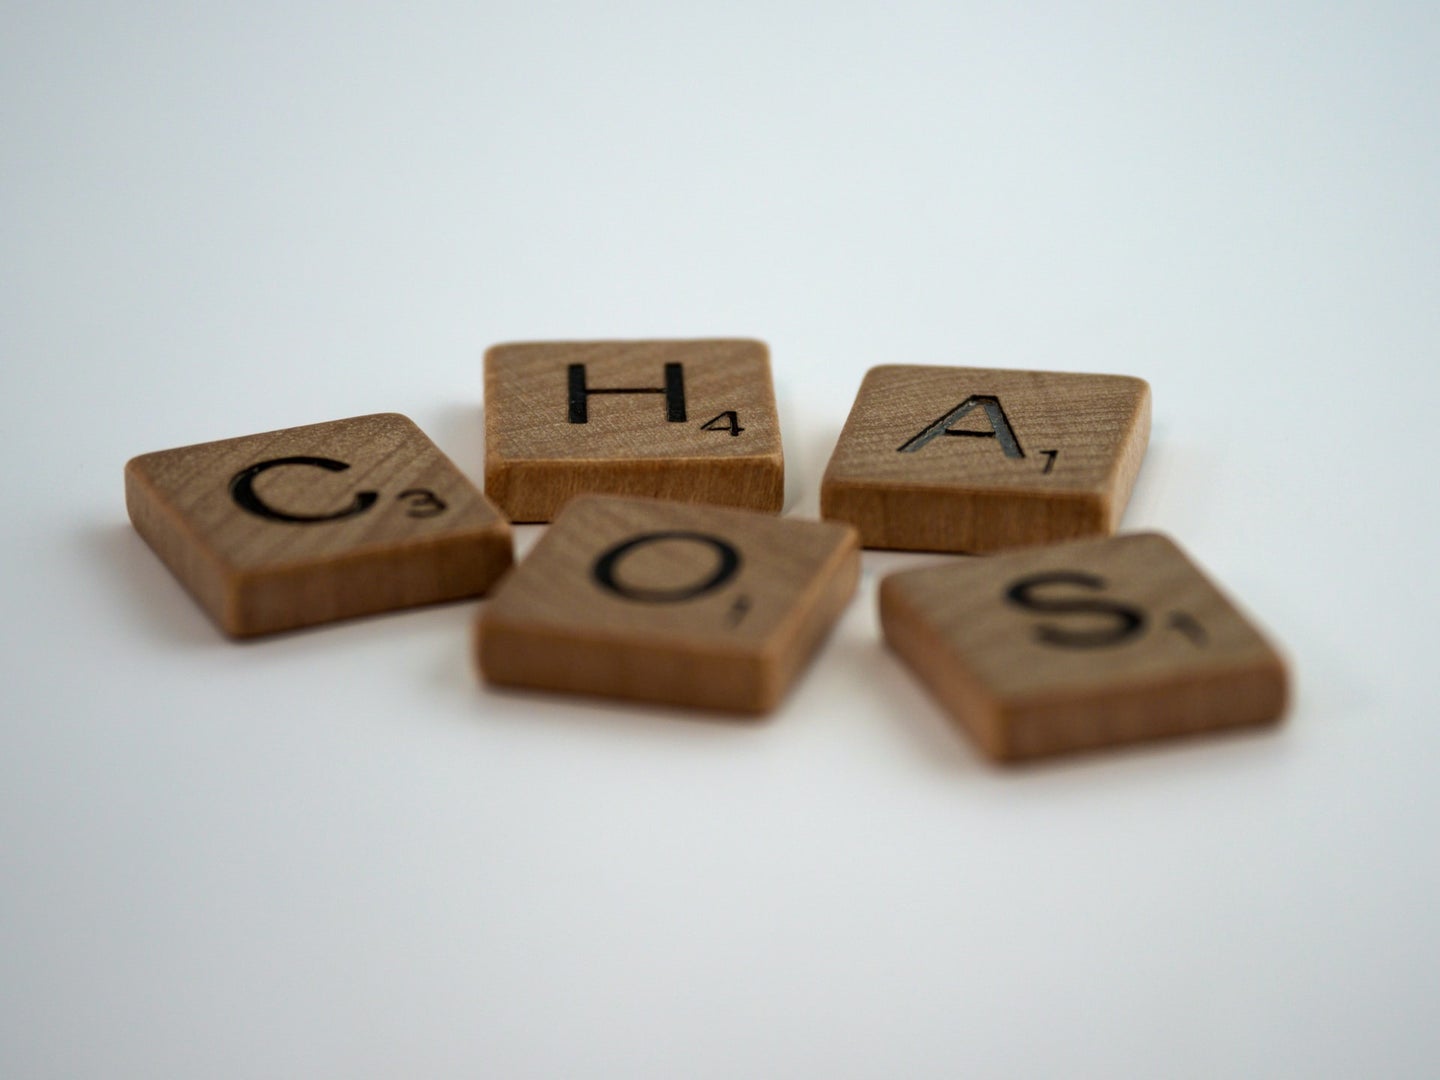 Chaos spelled in Scrabble pieces